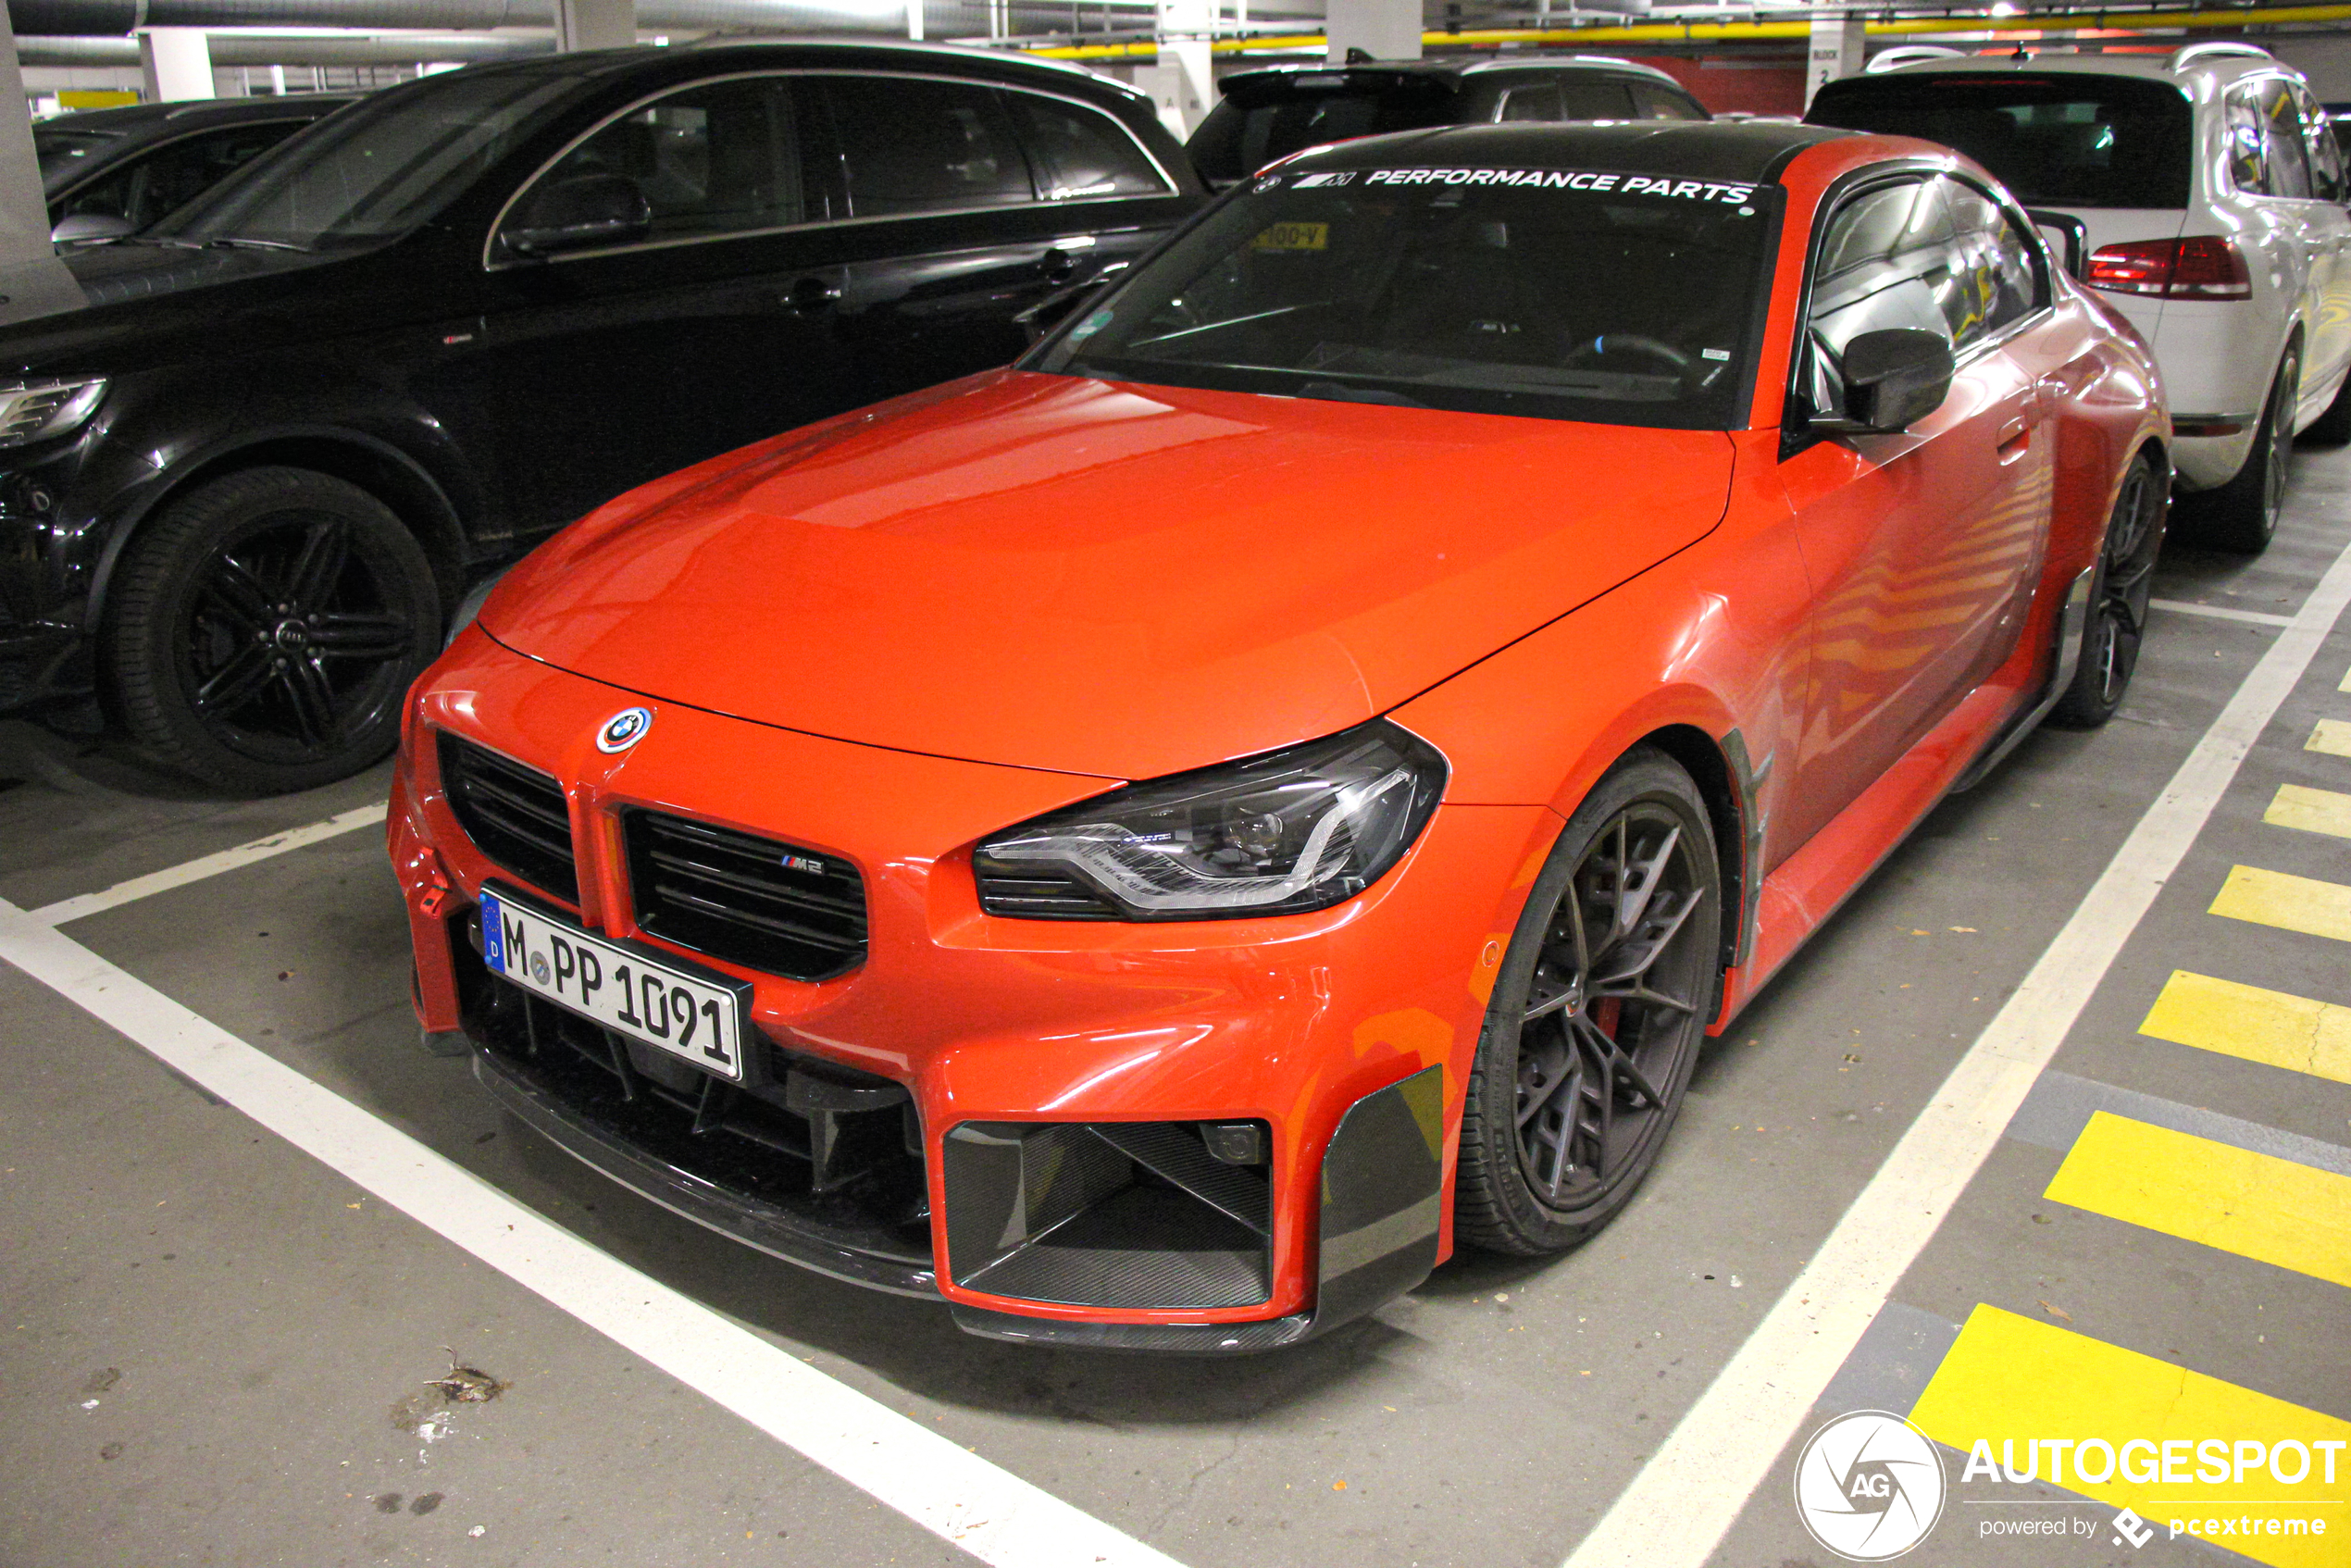 First BMW M2 Coupé shows up in Essen